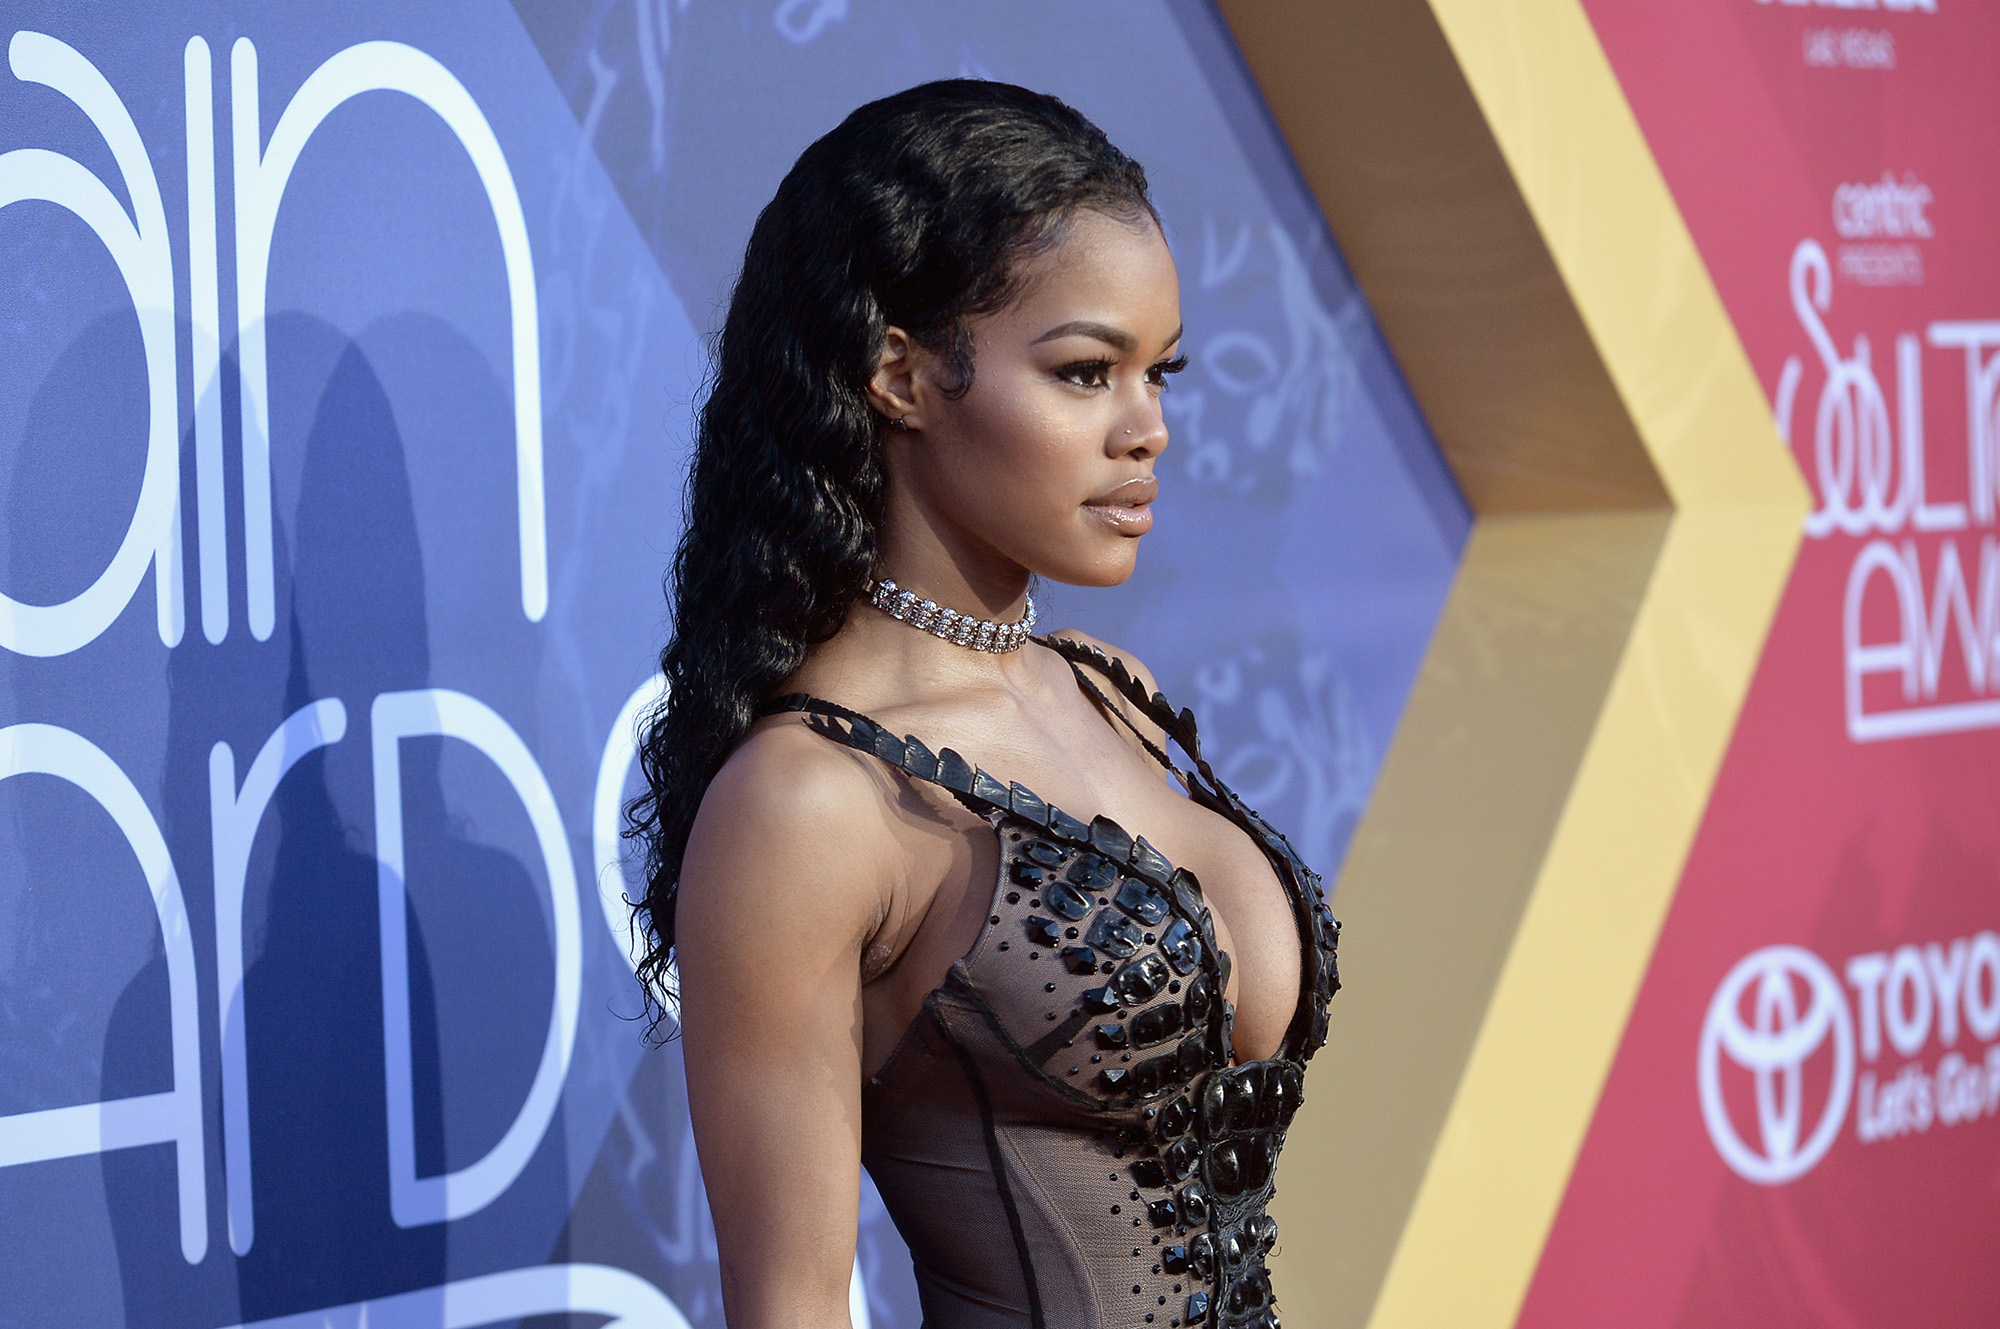 Teyana Taylor Photo by Paras Griffin/BET/Getty Images for BET